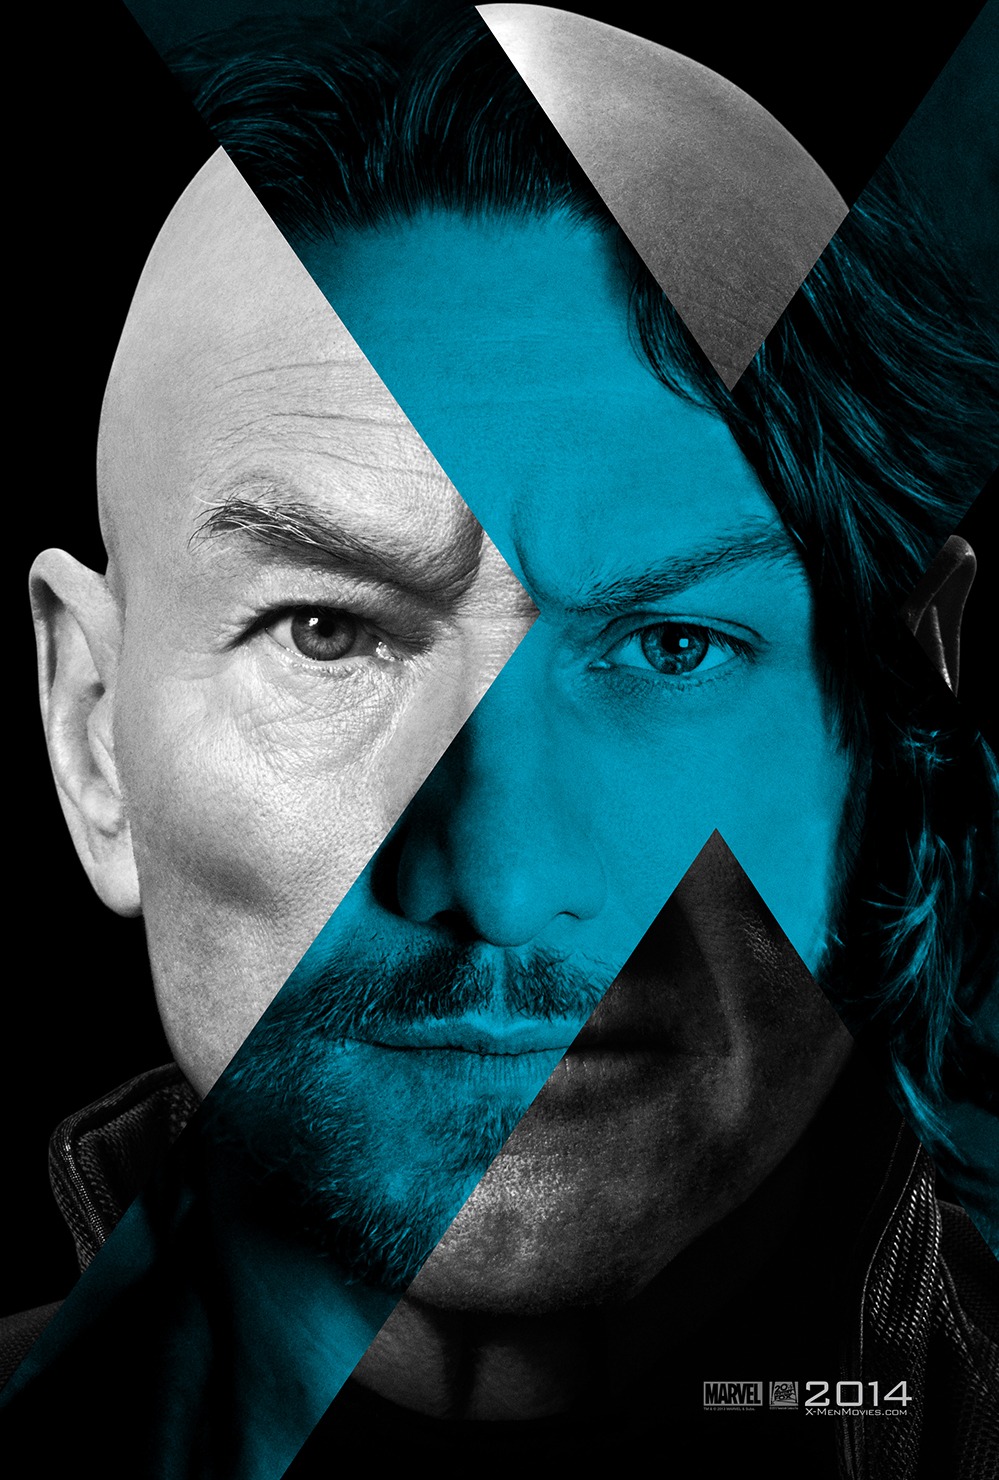 X-Men: Days of Future Past character poster